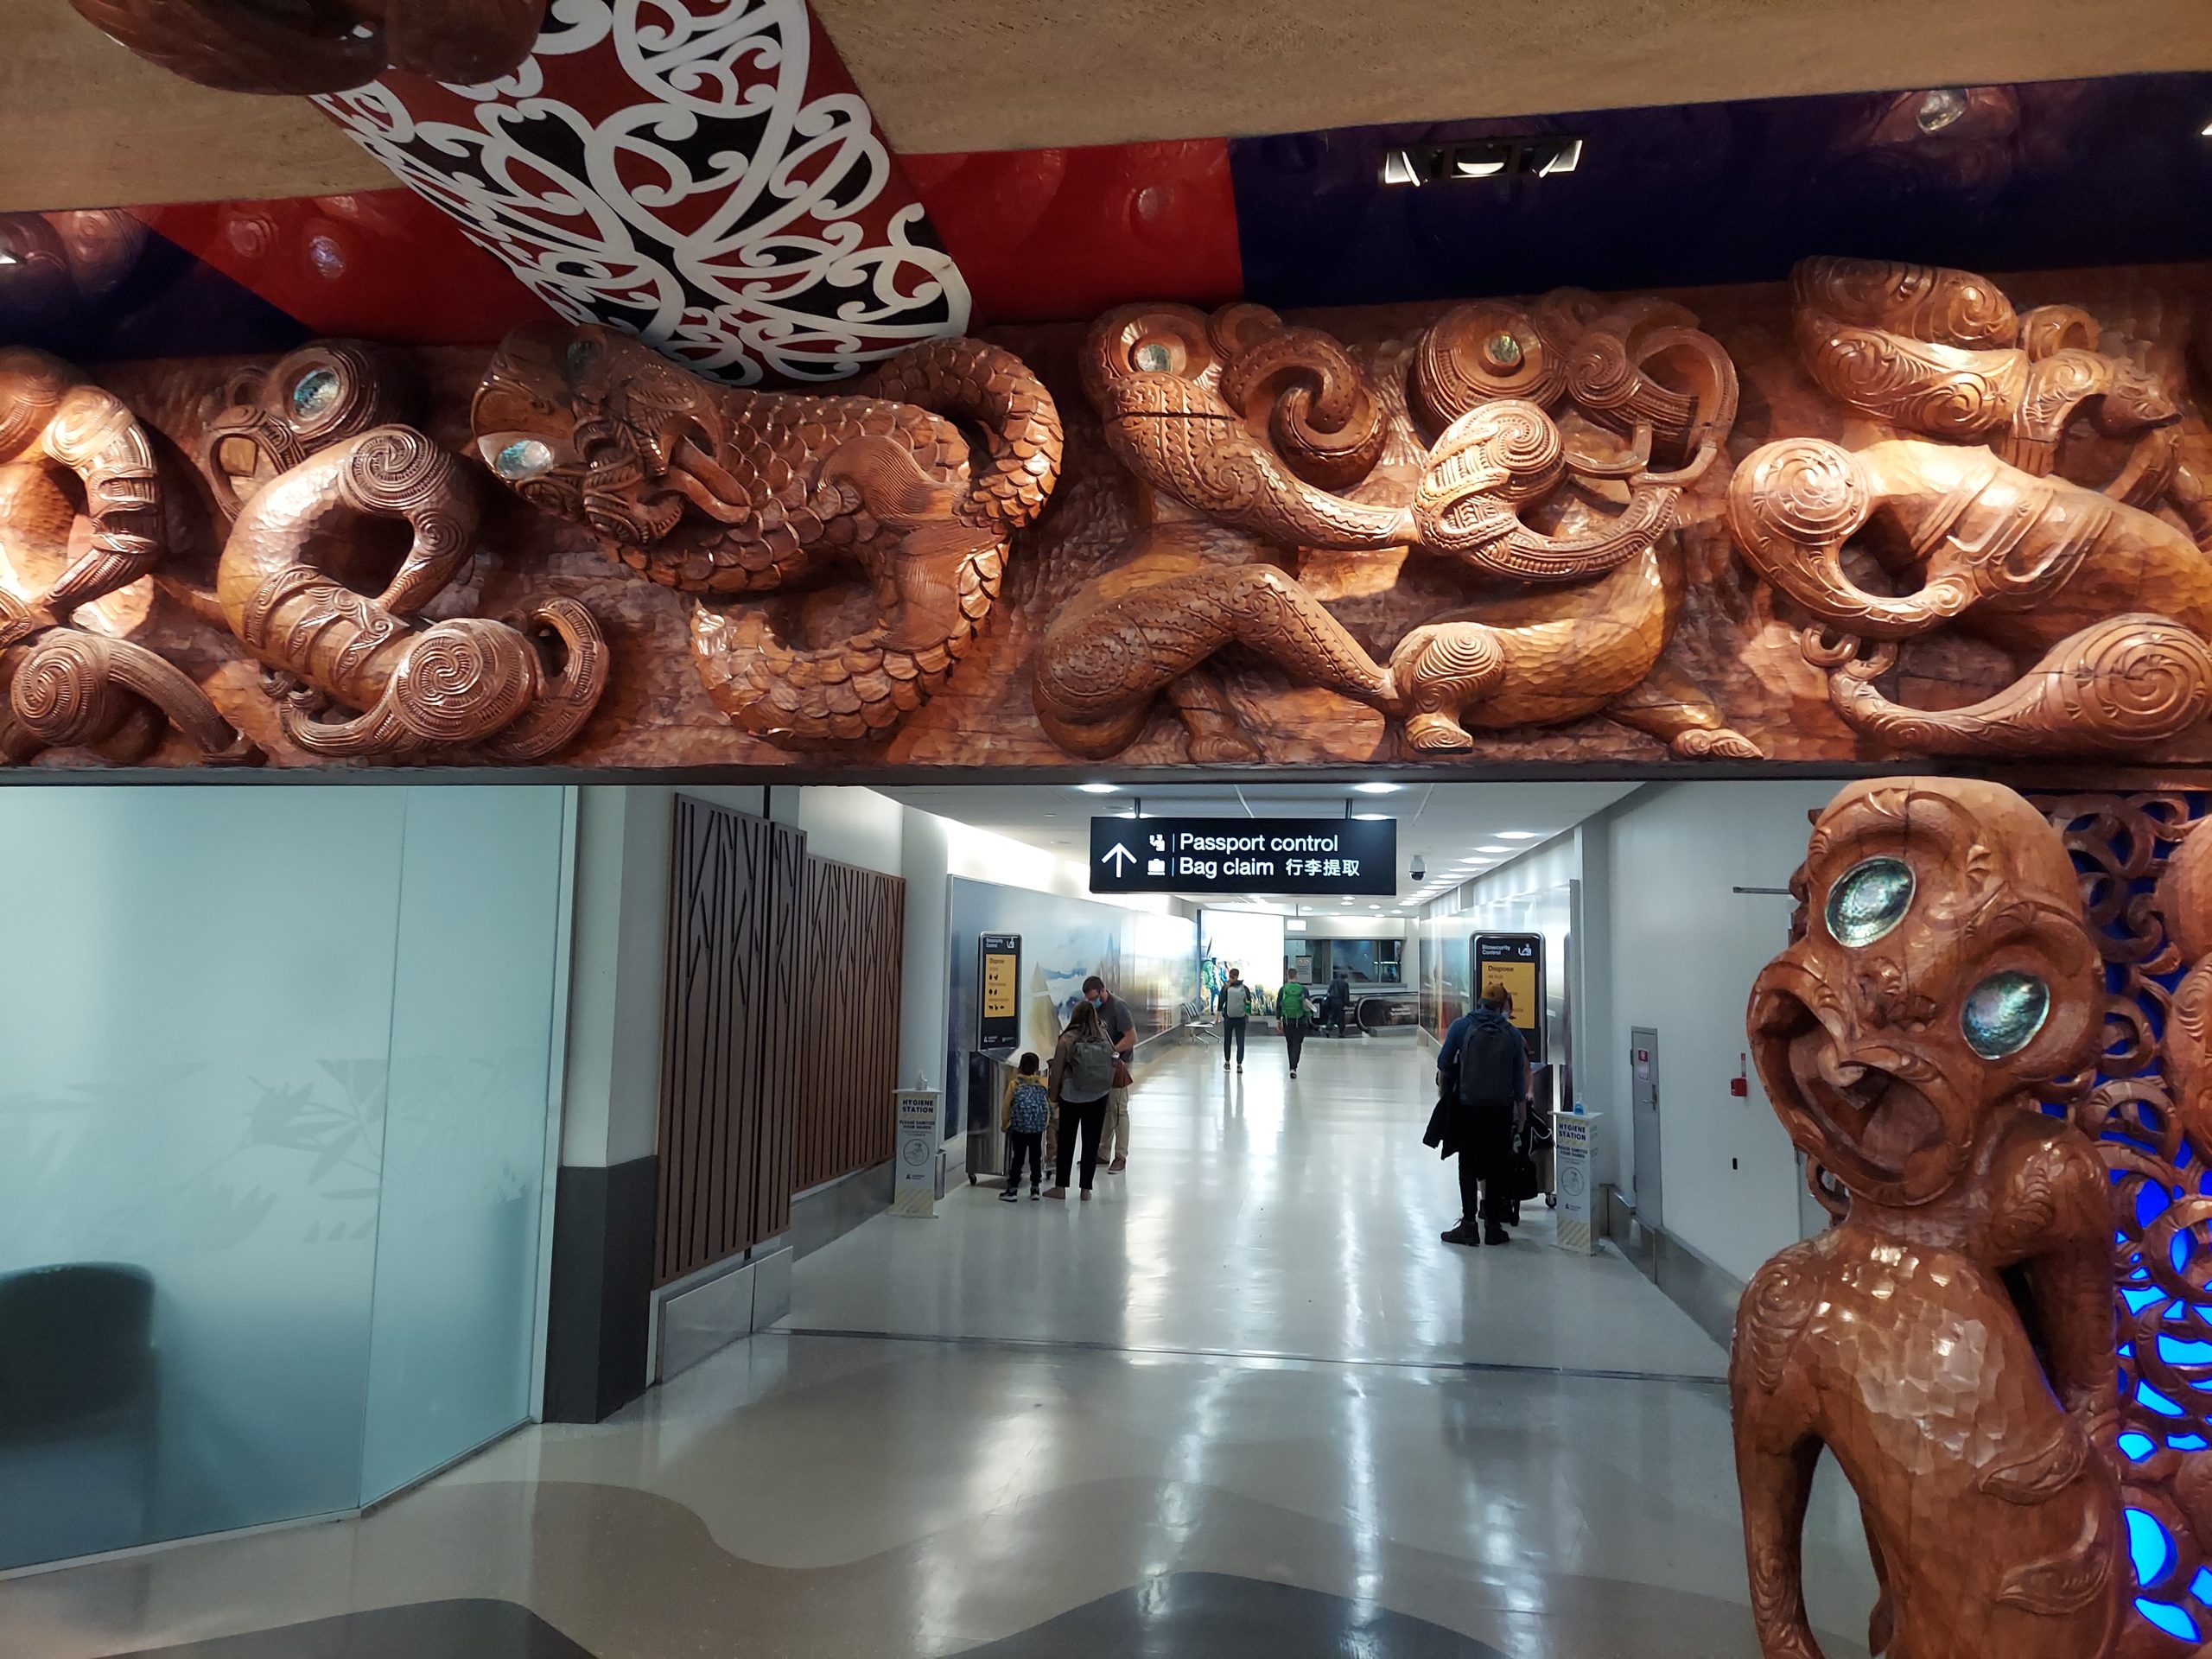 Maori sculptures surround one of the walls in the international arrival terminal of the Auckland Airport.